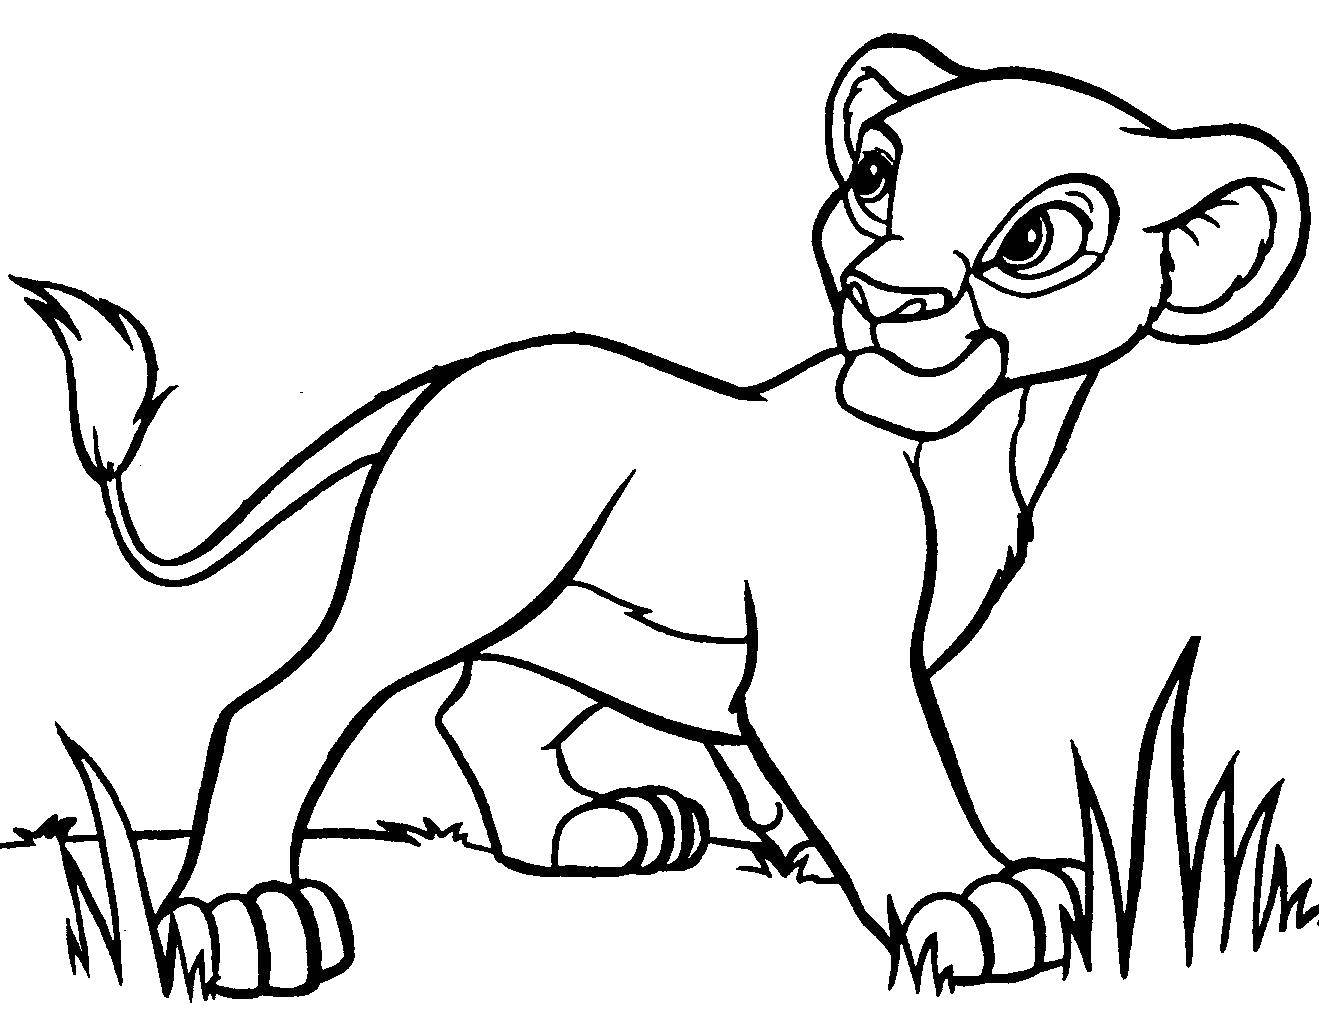 Coloring Lion. Category cartoons. Tags:  Disney, Lion King.